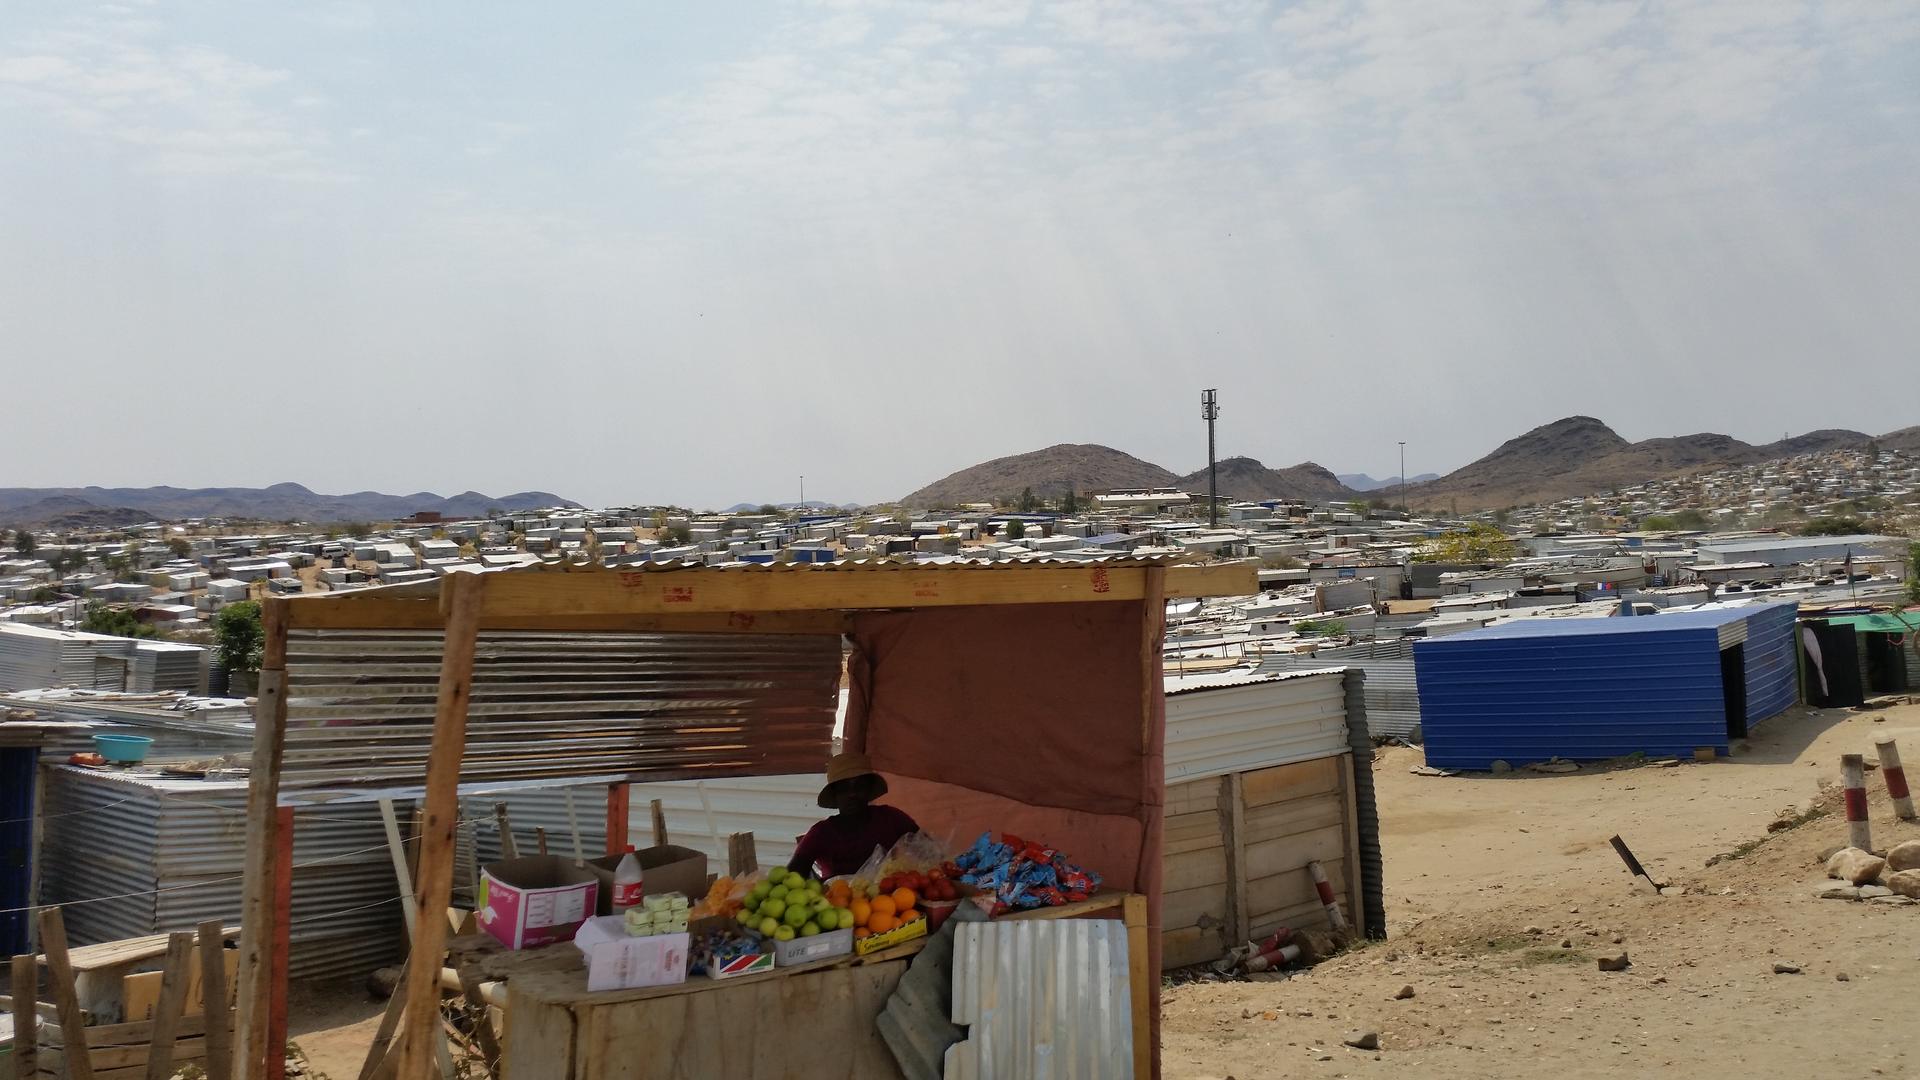 The cutting-edge water recycling plant serves a city with many poor neighborhoods, like this one right outside its gates. Pierre van Rensburg says necessity is the mother of invention in developing countries like Namibia, which he thinks can lead the worl